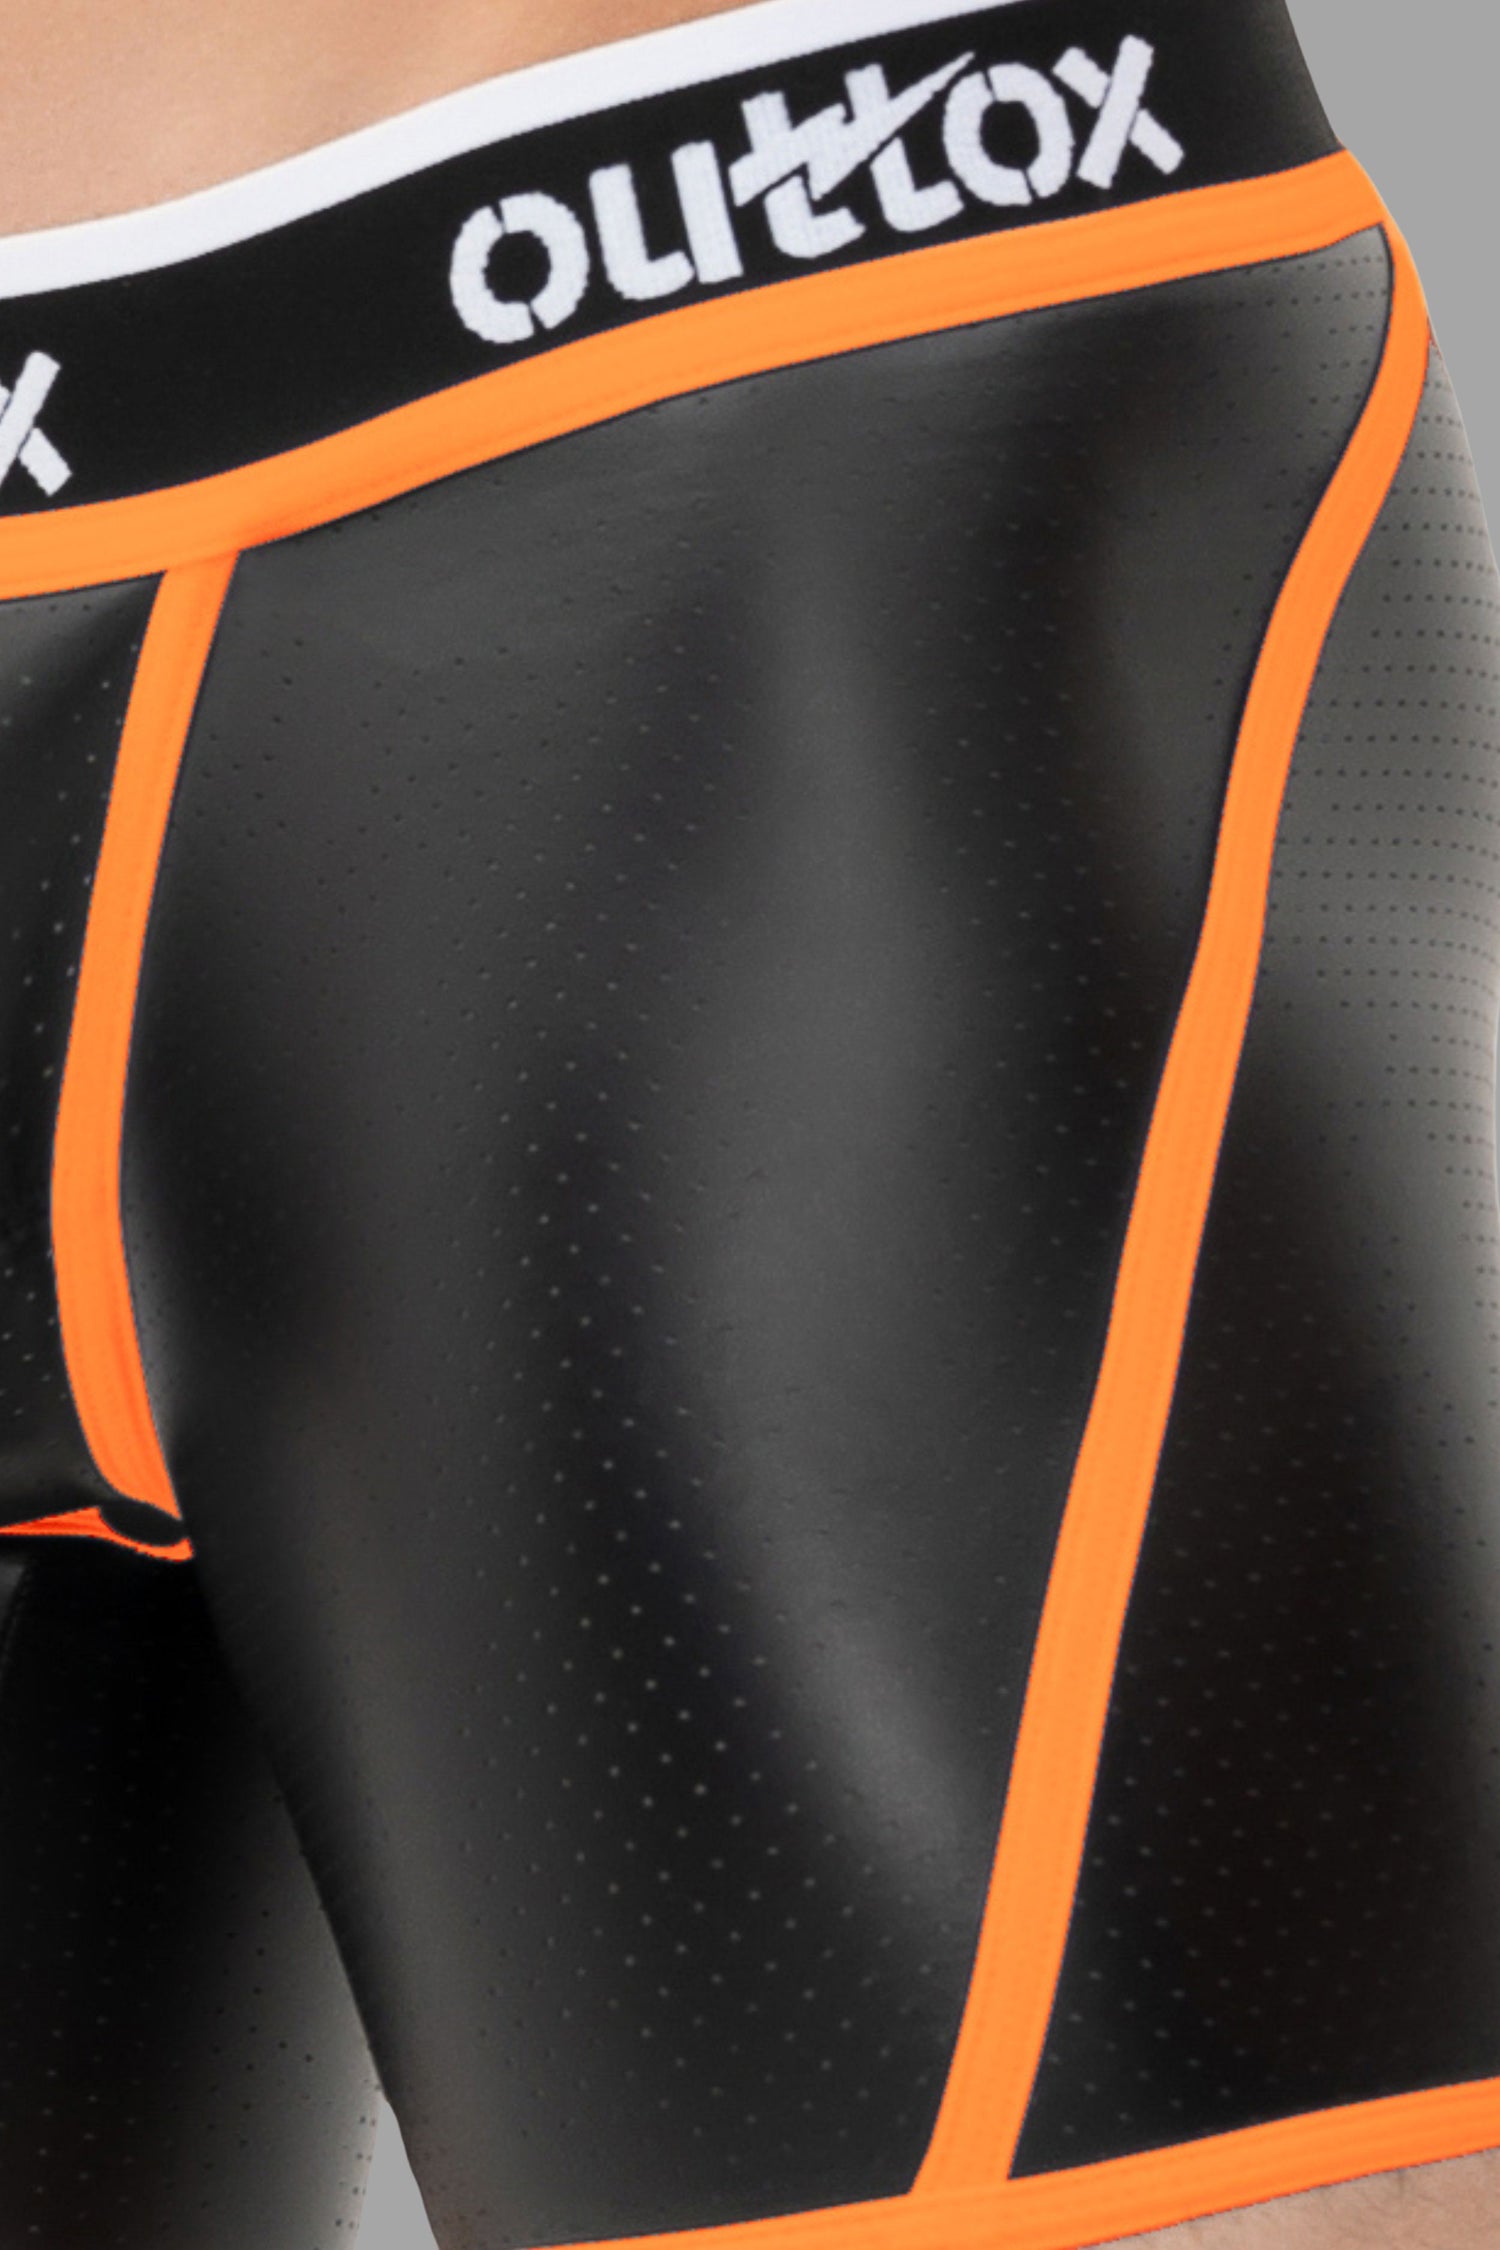 Outtox. Open Rear Shorts with Snap Codpiece. Black+Orange